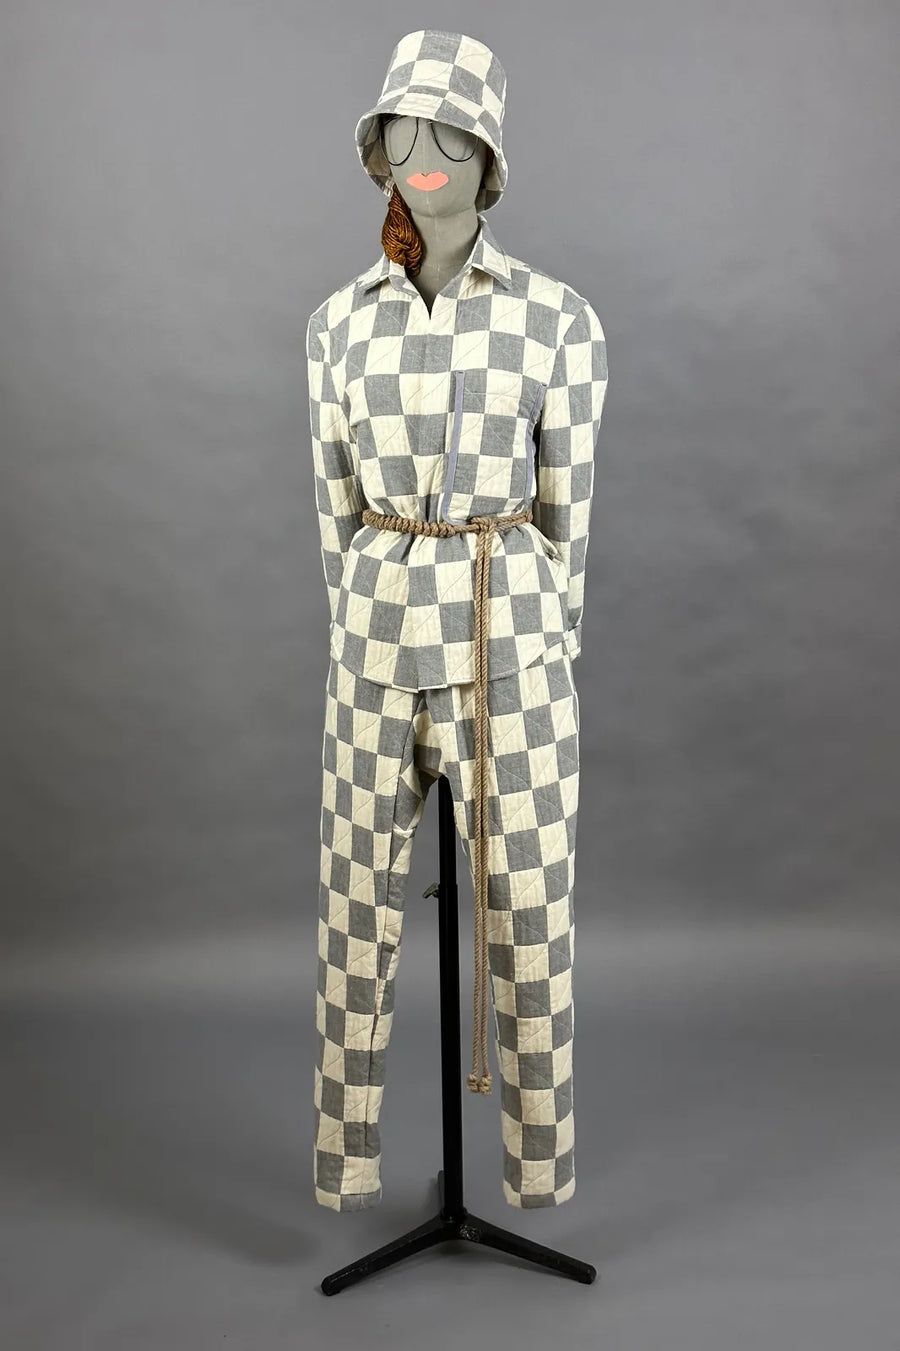 classic drawstring trouser quilted check: fog/salt